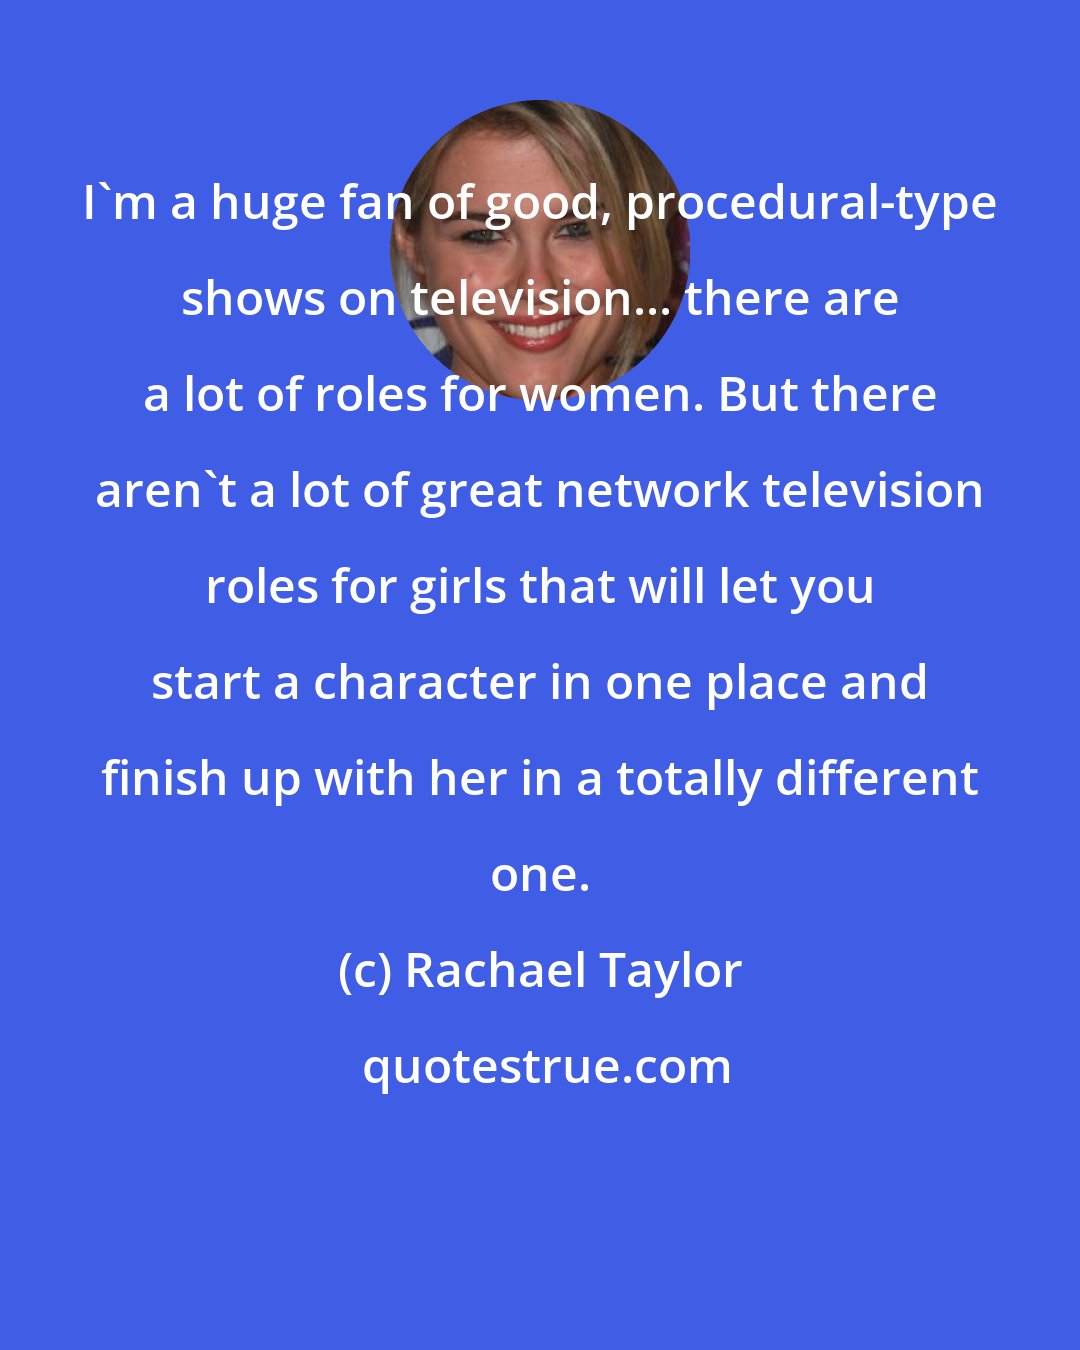 Rachael Taylor: I'm a huge fan of good, procedural-type shows on television... there are a lot of roles for women. But there aren't a lot of great network television roles for girls that will let you start a character in one place and finish up with her in a totally different one.